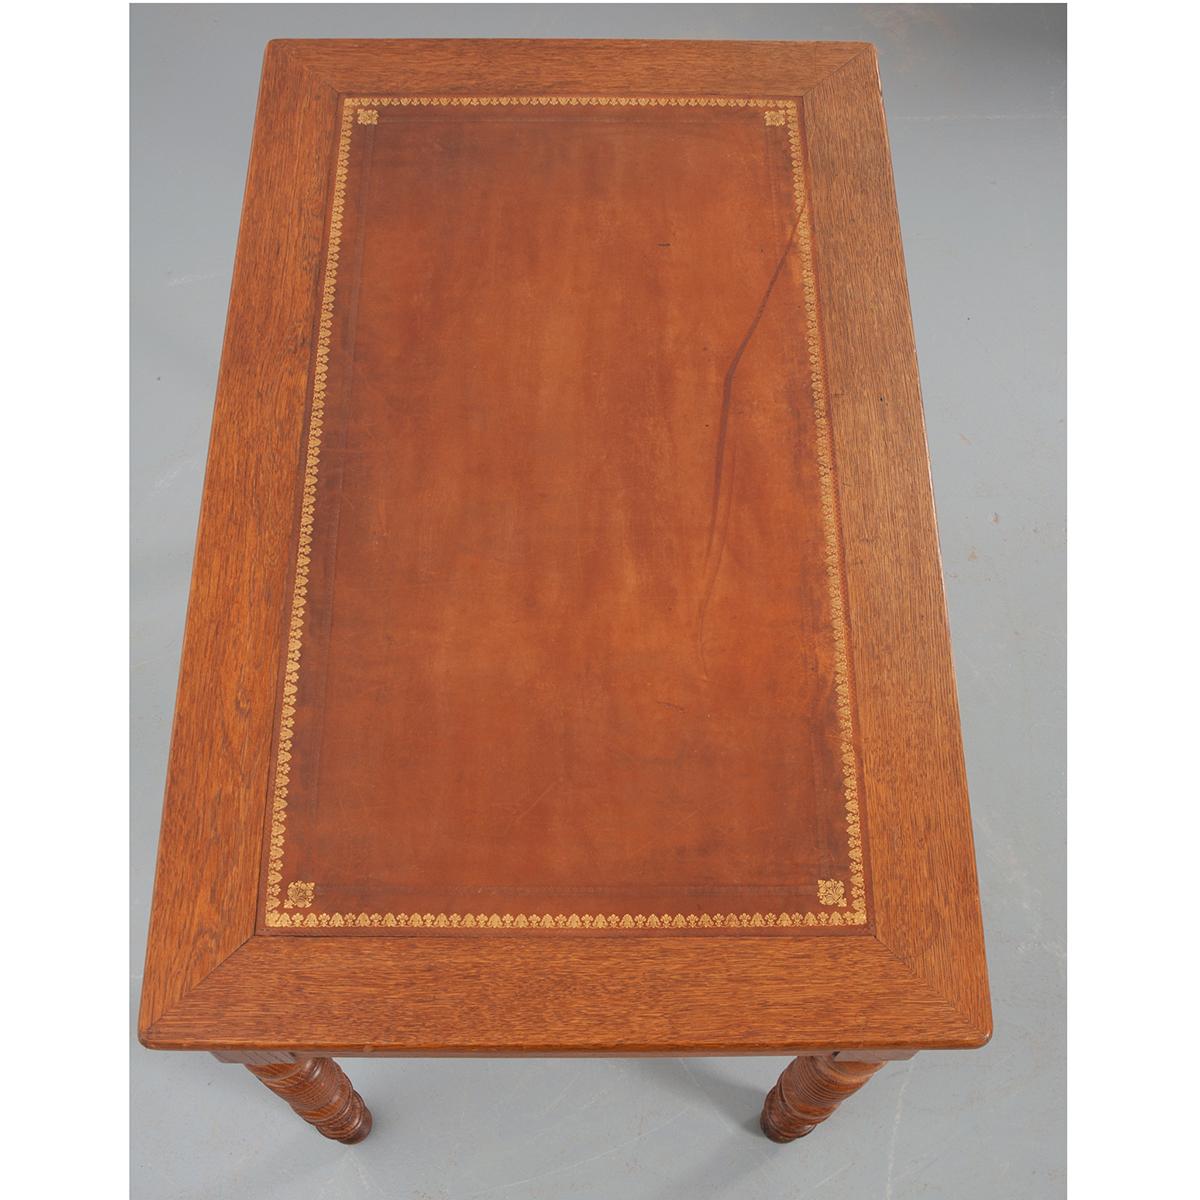 An extraordinary oak desk could serve as an occasional table or a small writing desk. The writing surface has a beautiful inset, warm cognac color leather top with gold filigree banding and two different tooled designs. Two locking drawers are